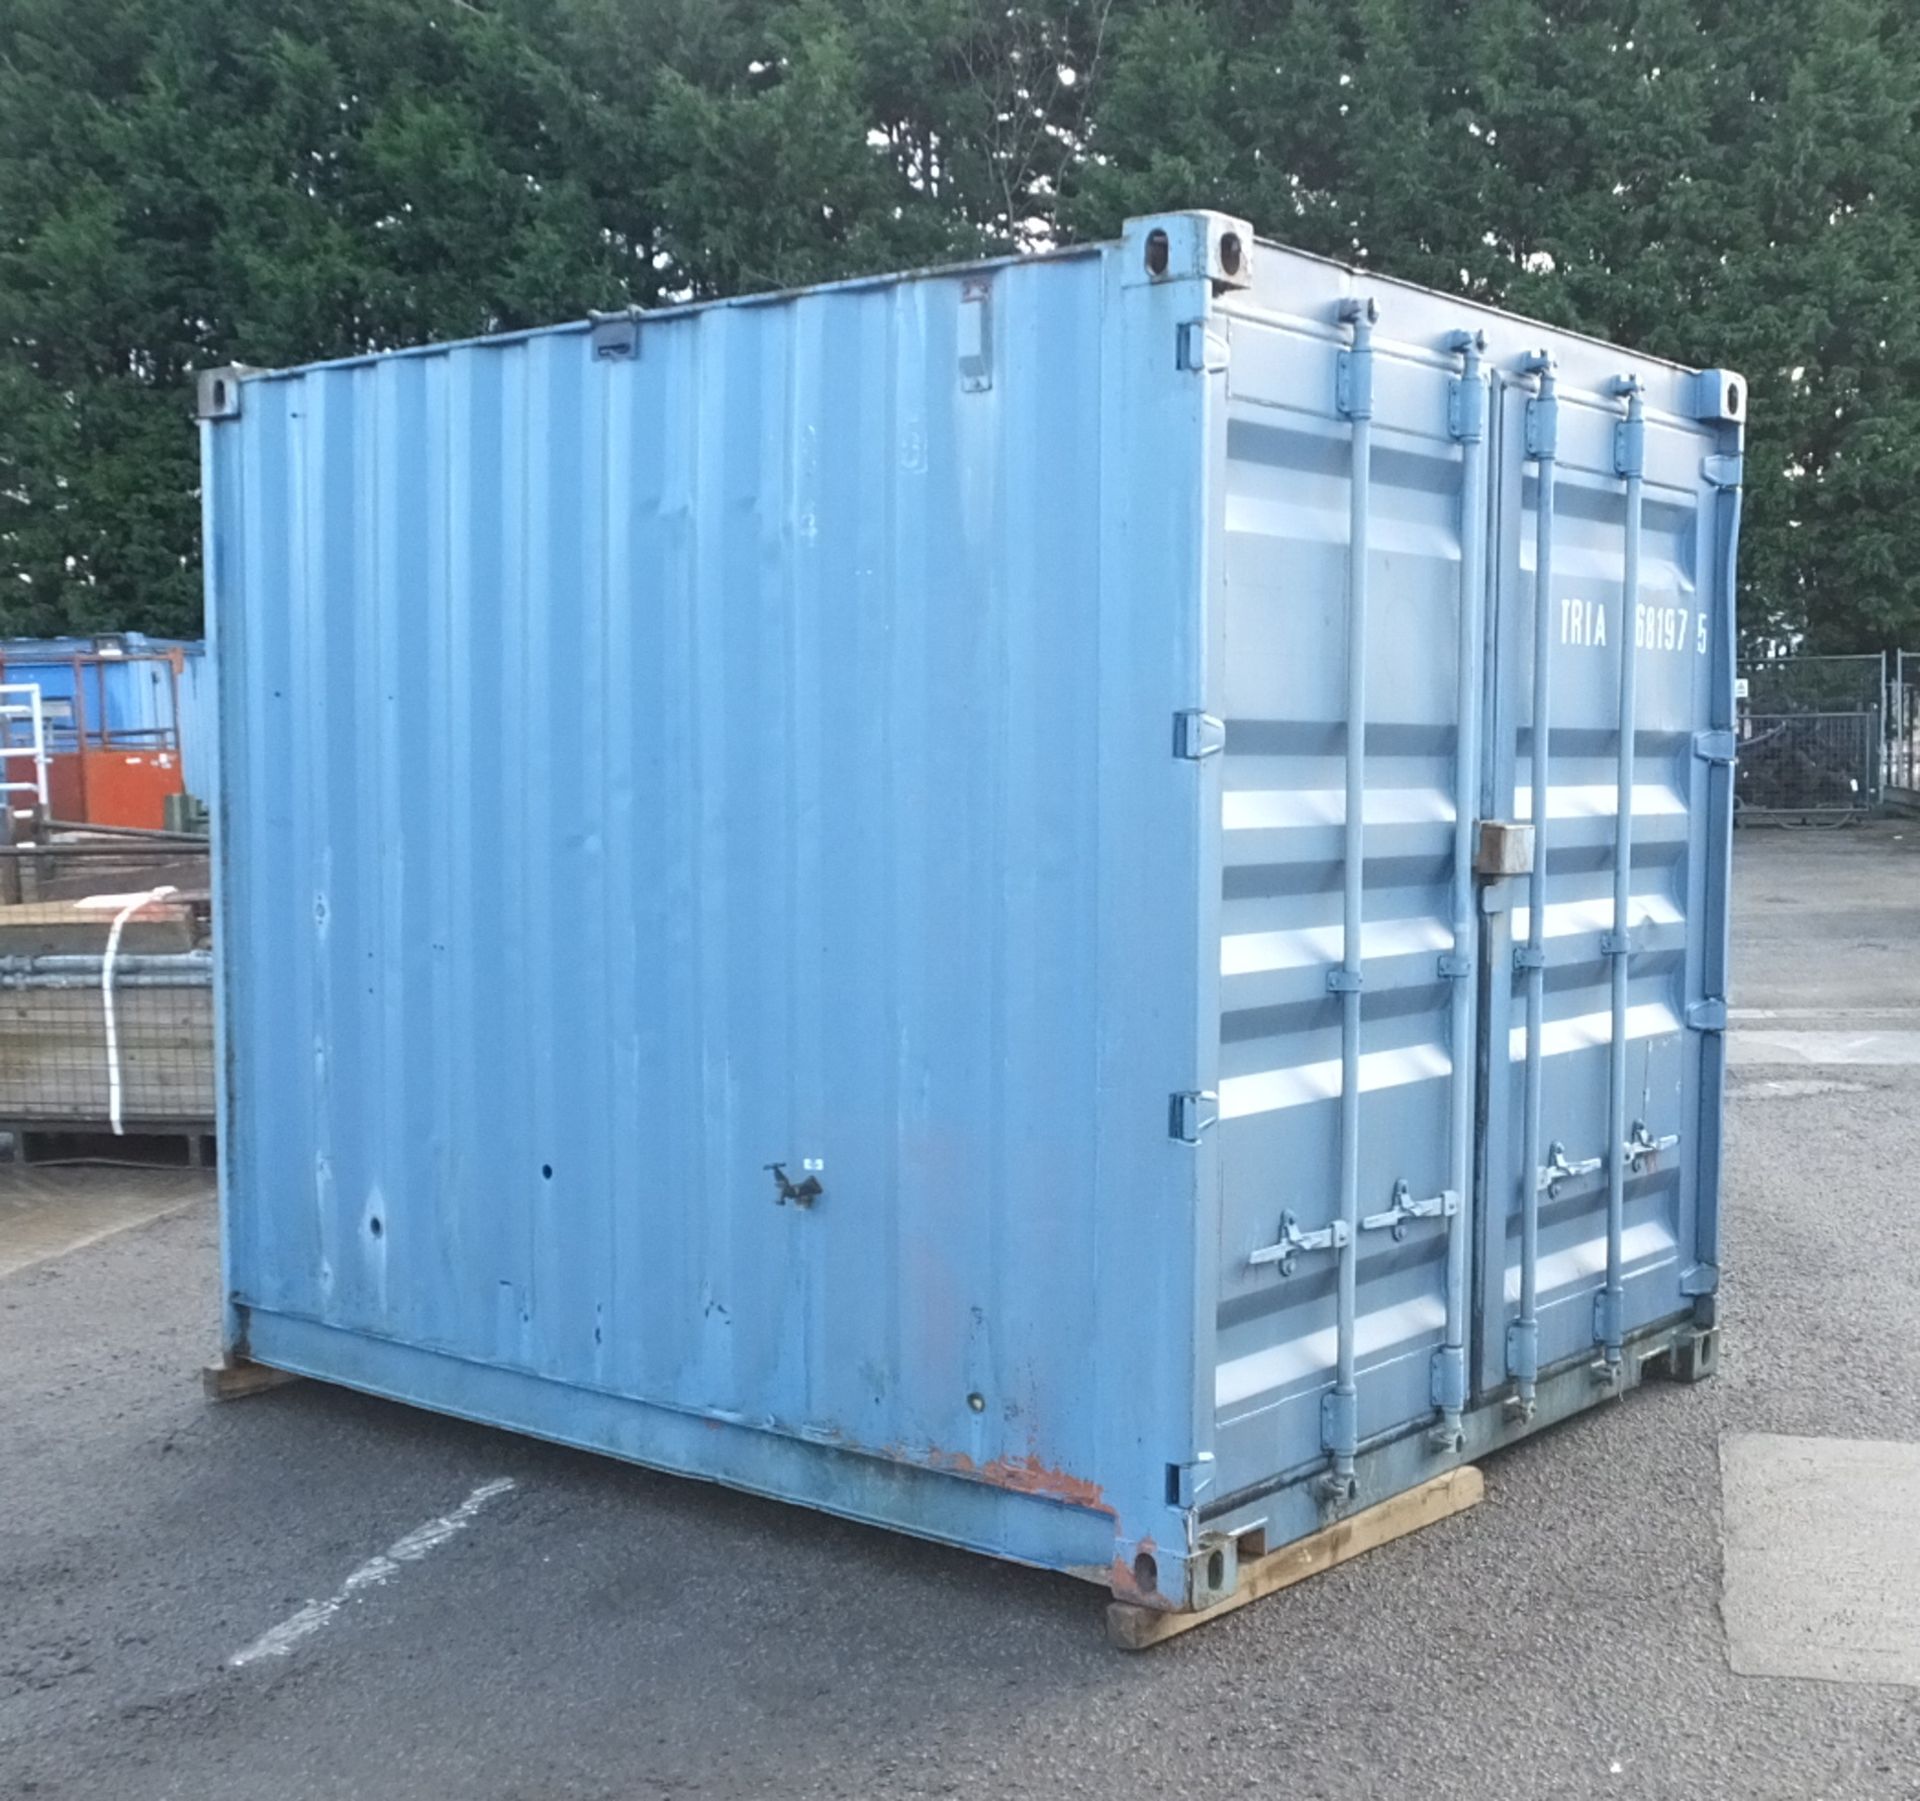 Blue ISO Container - L 3050mm x W 2440mm x H 2600mm